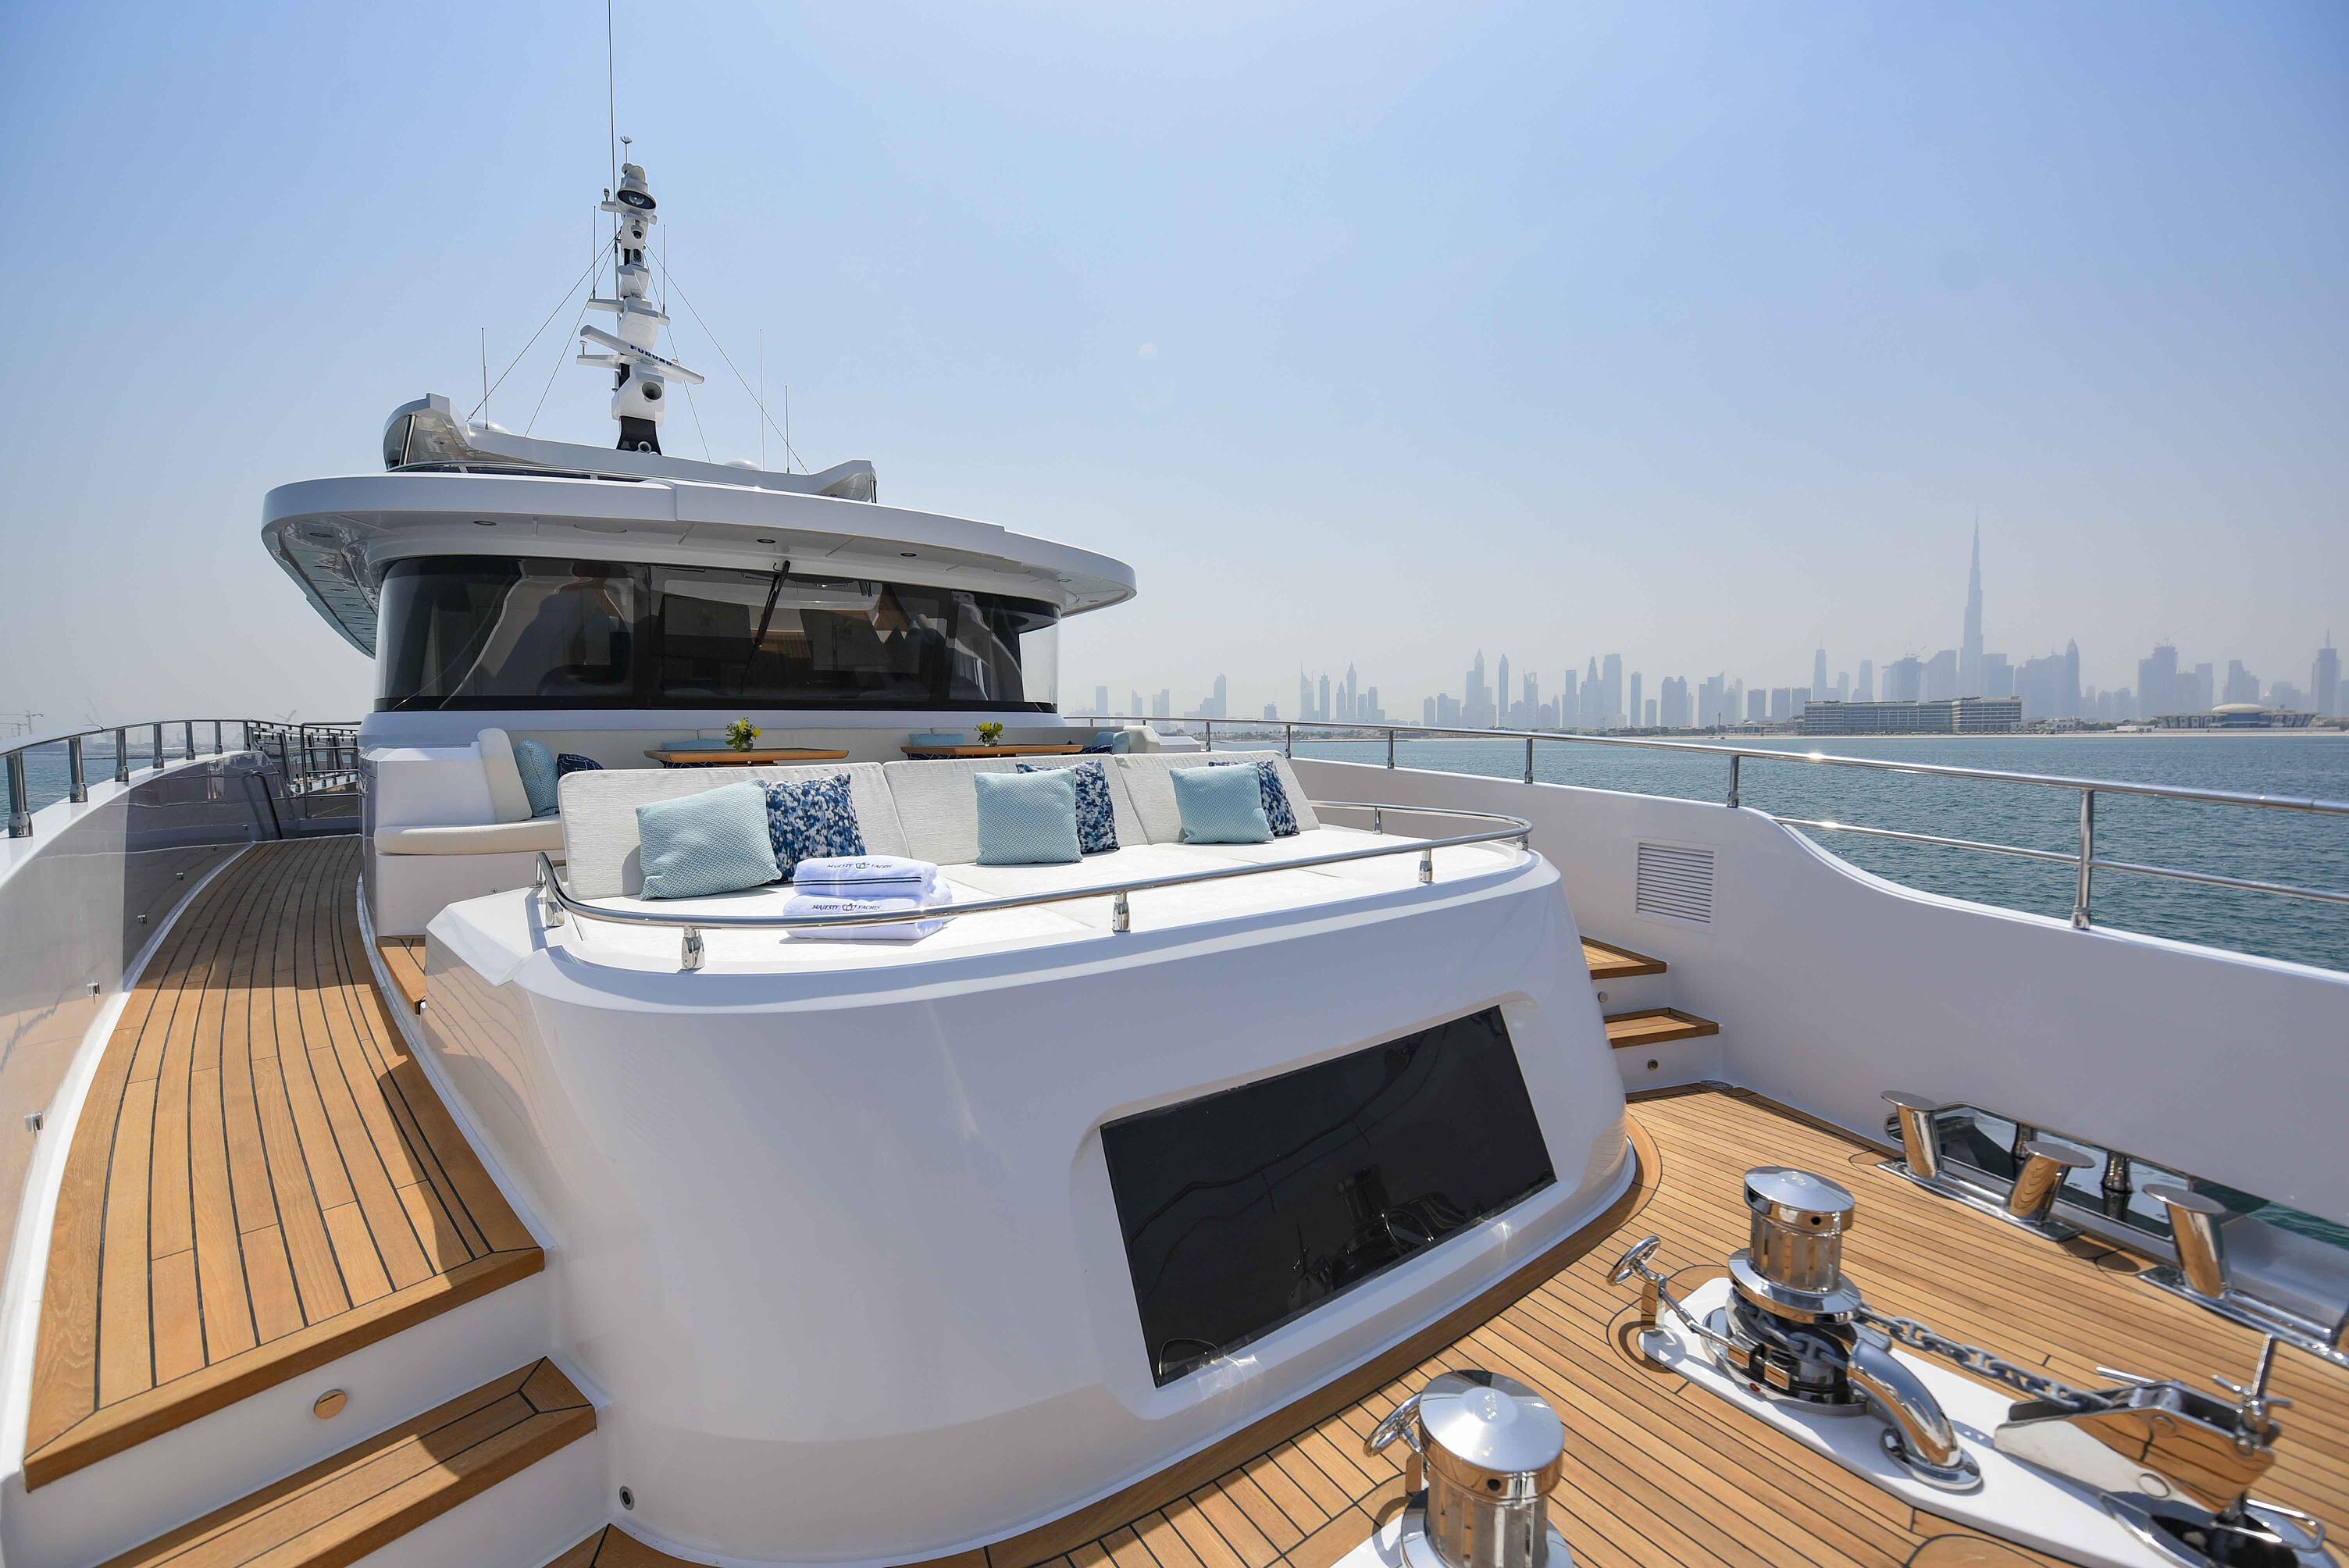 Foredeck sun pads and seating area